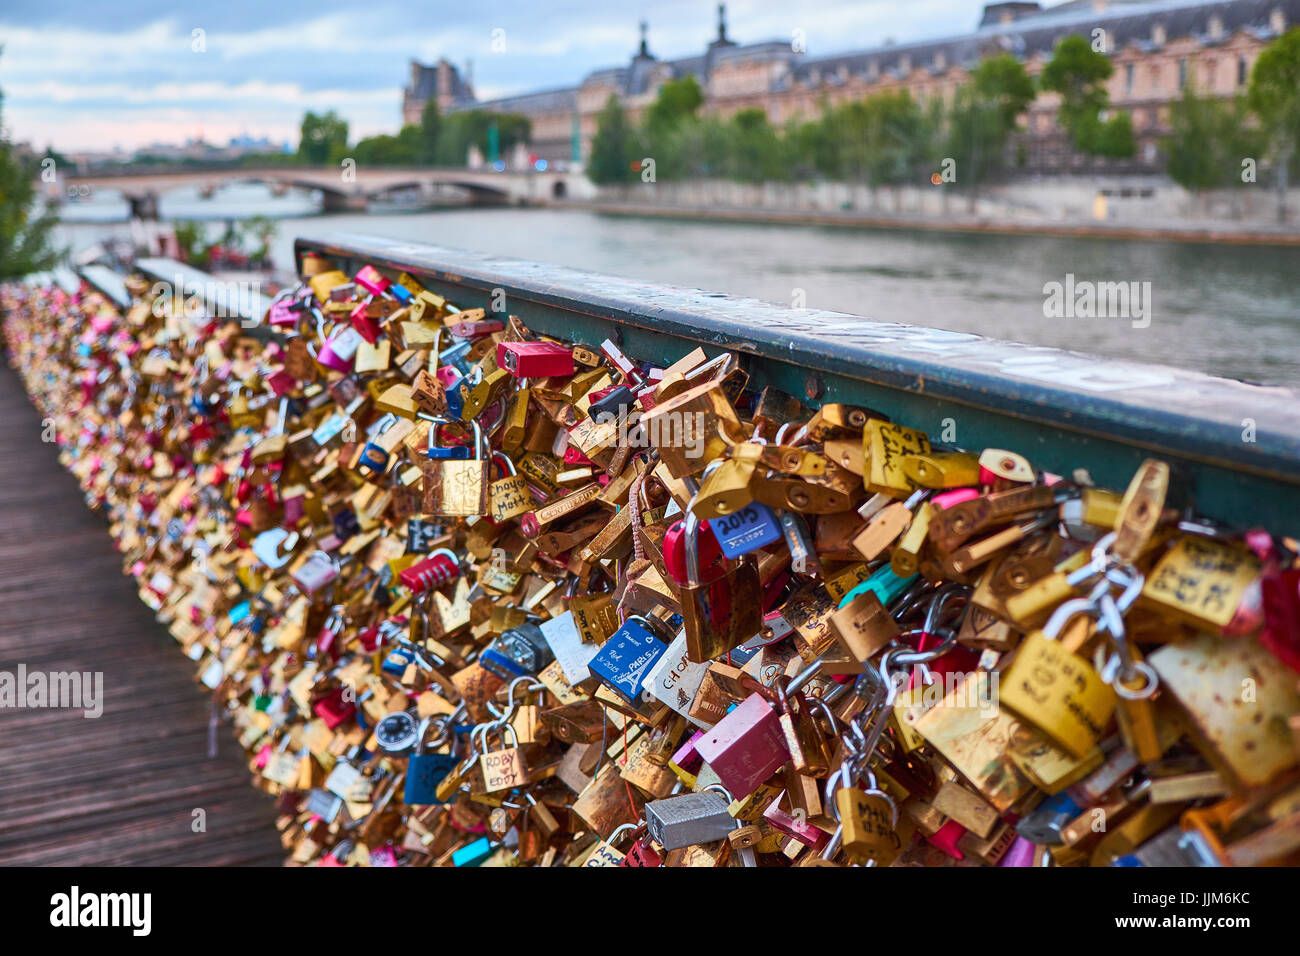 PARIS, FRANCE - JULY 26, 2015: Love locks on a fence on the access ramp to the Pont des Arts over the River Seine in Paris which is covered with thous Stock Photo